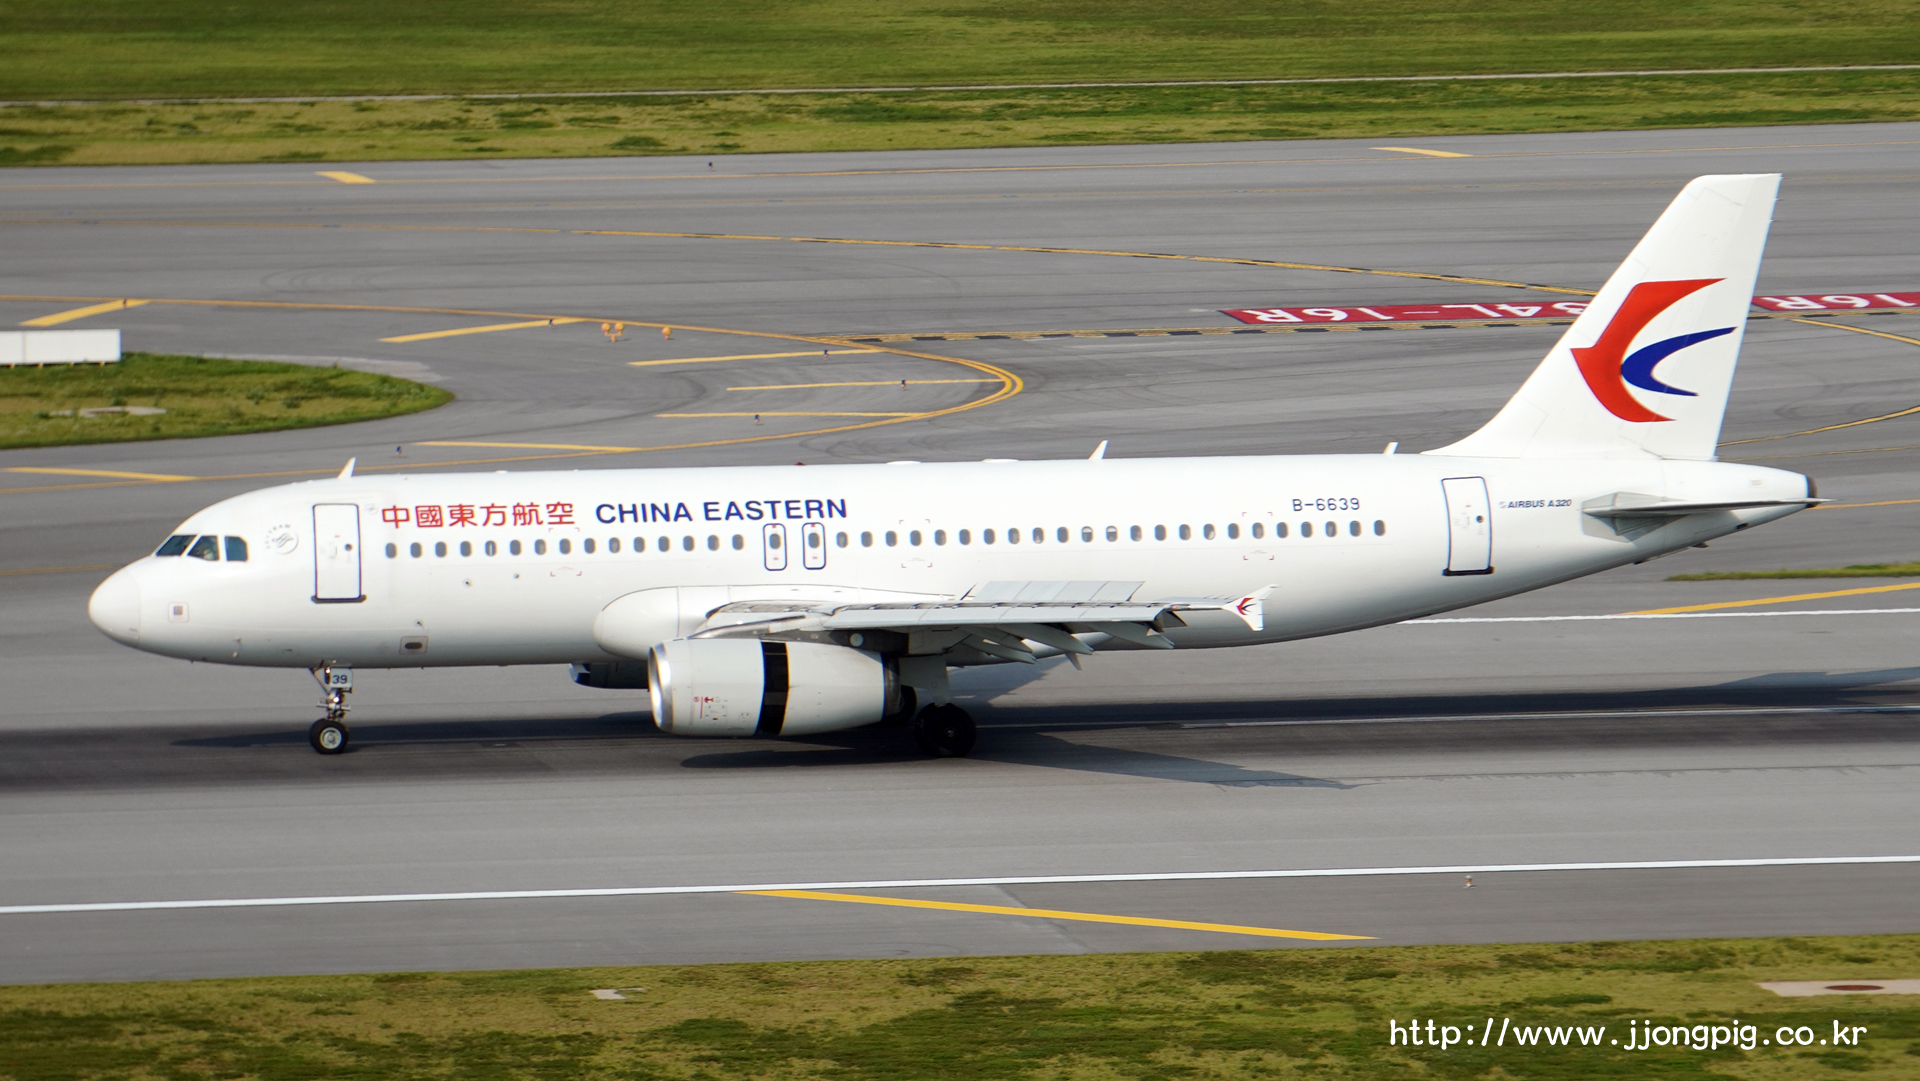 China Eastern Airlines B-6639 Airbus A320-200